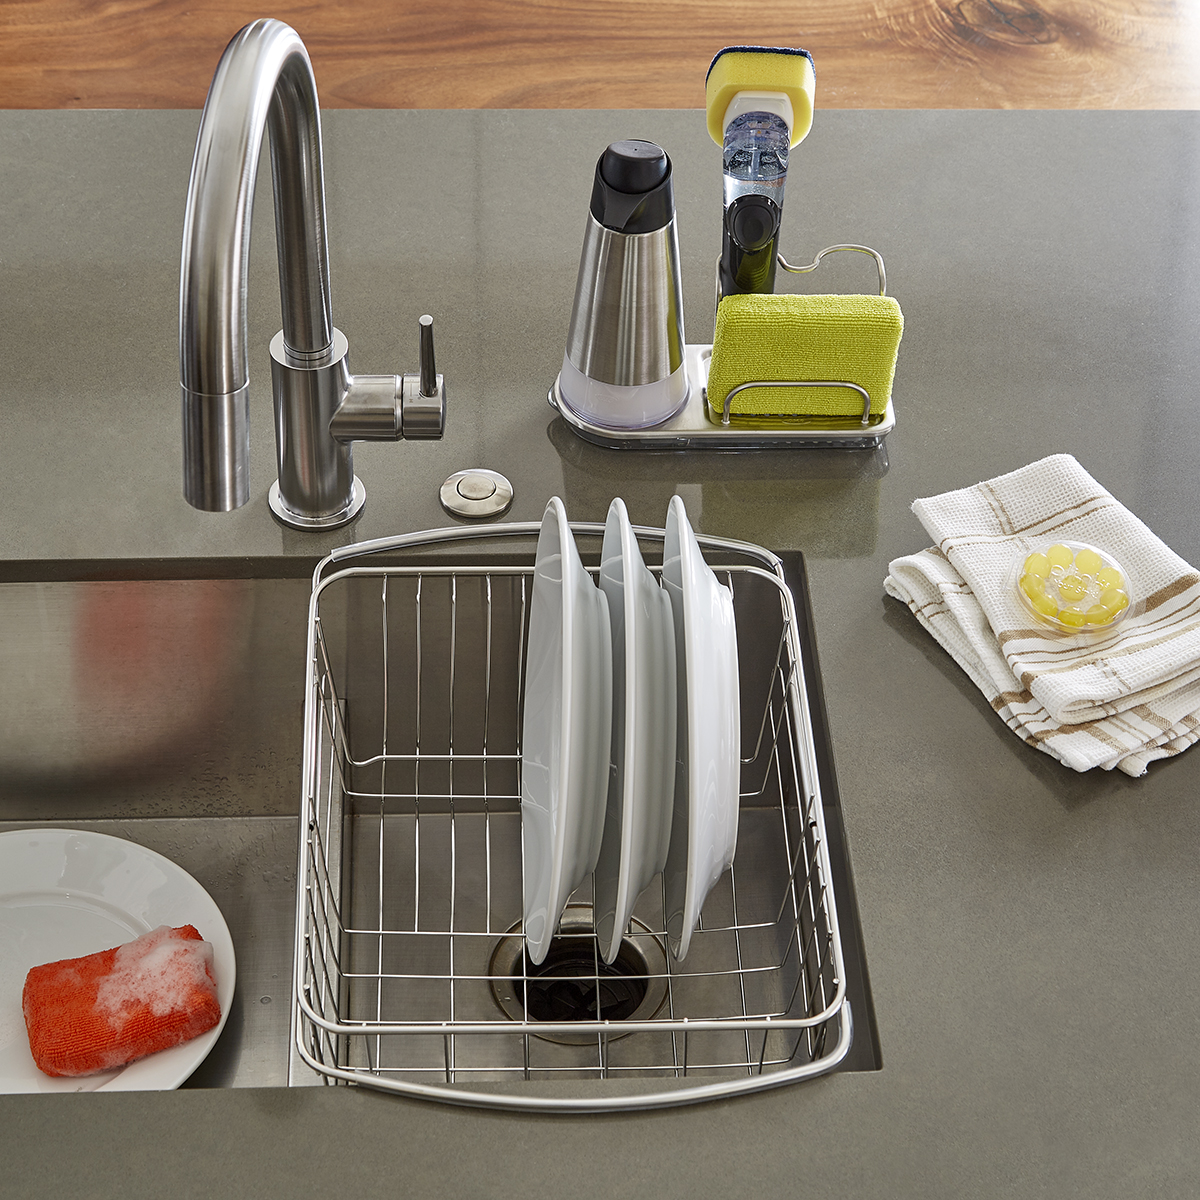 https://www.containerstore.com/catalogimages/311635/10011443-Kitchen-Sink-Started-Kit.jpg